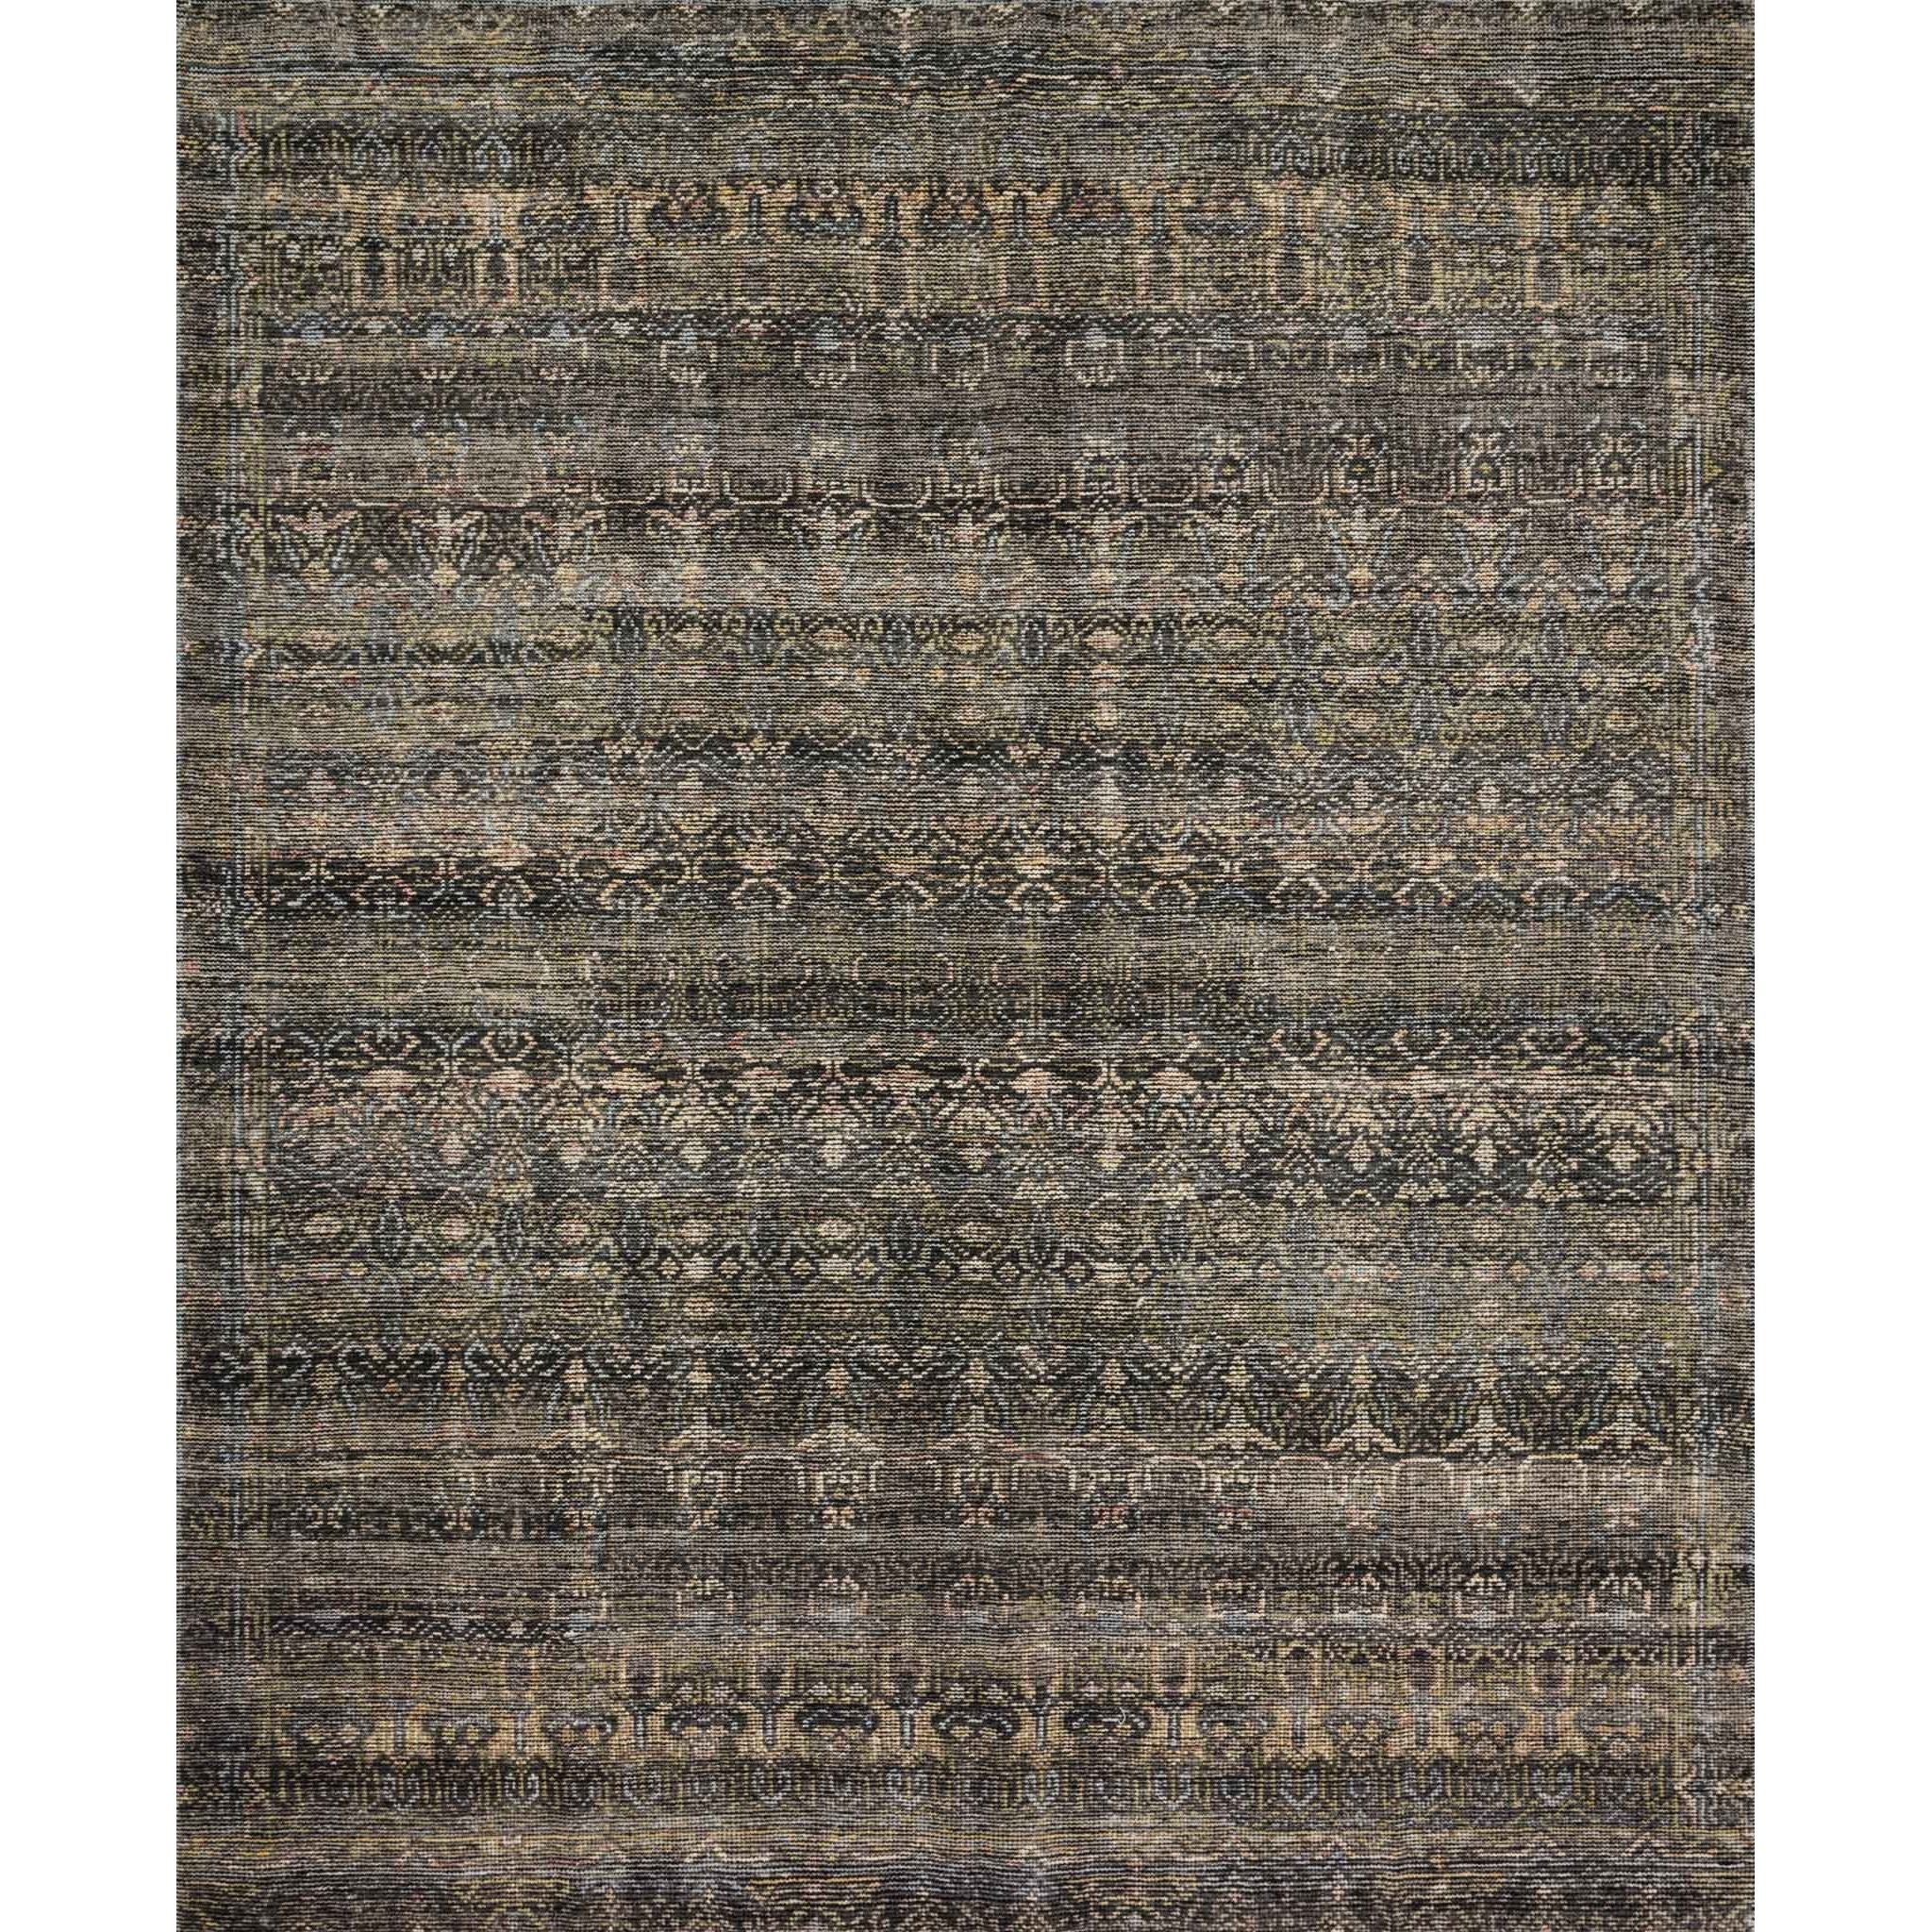 Hand-knotted in India of 100% wool, the Amara Collection creates a casual yet refined vibe with high-end appeal.  Hand Knotted 100% Wool AMM-03 Charcoal/Lagoon